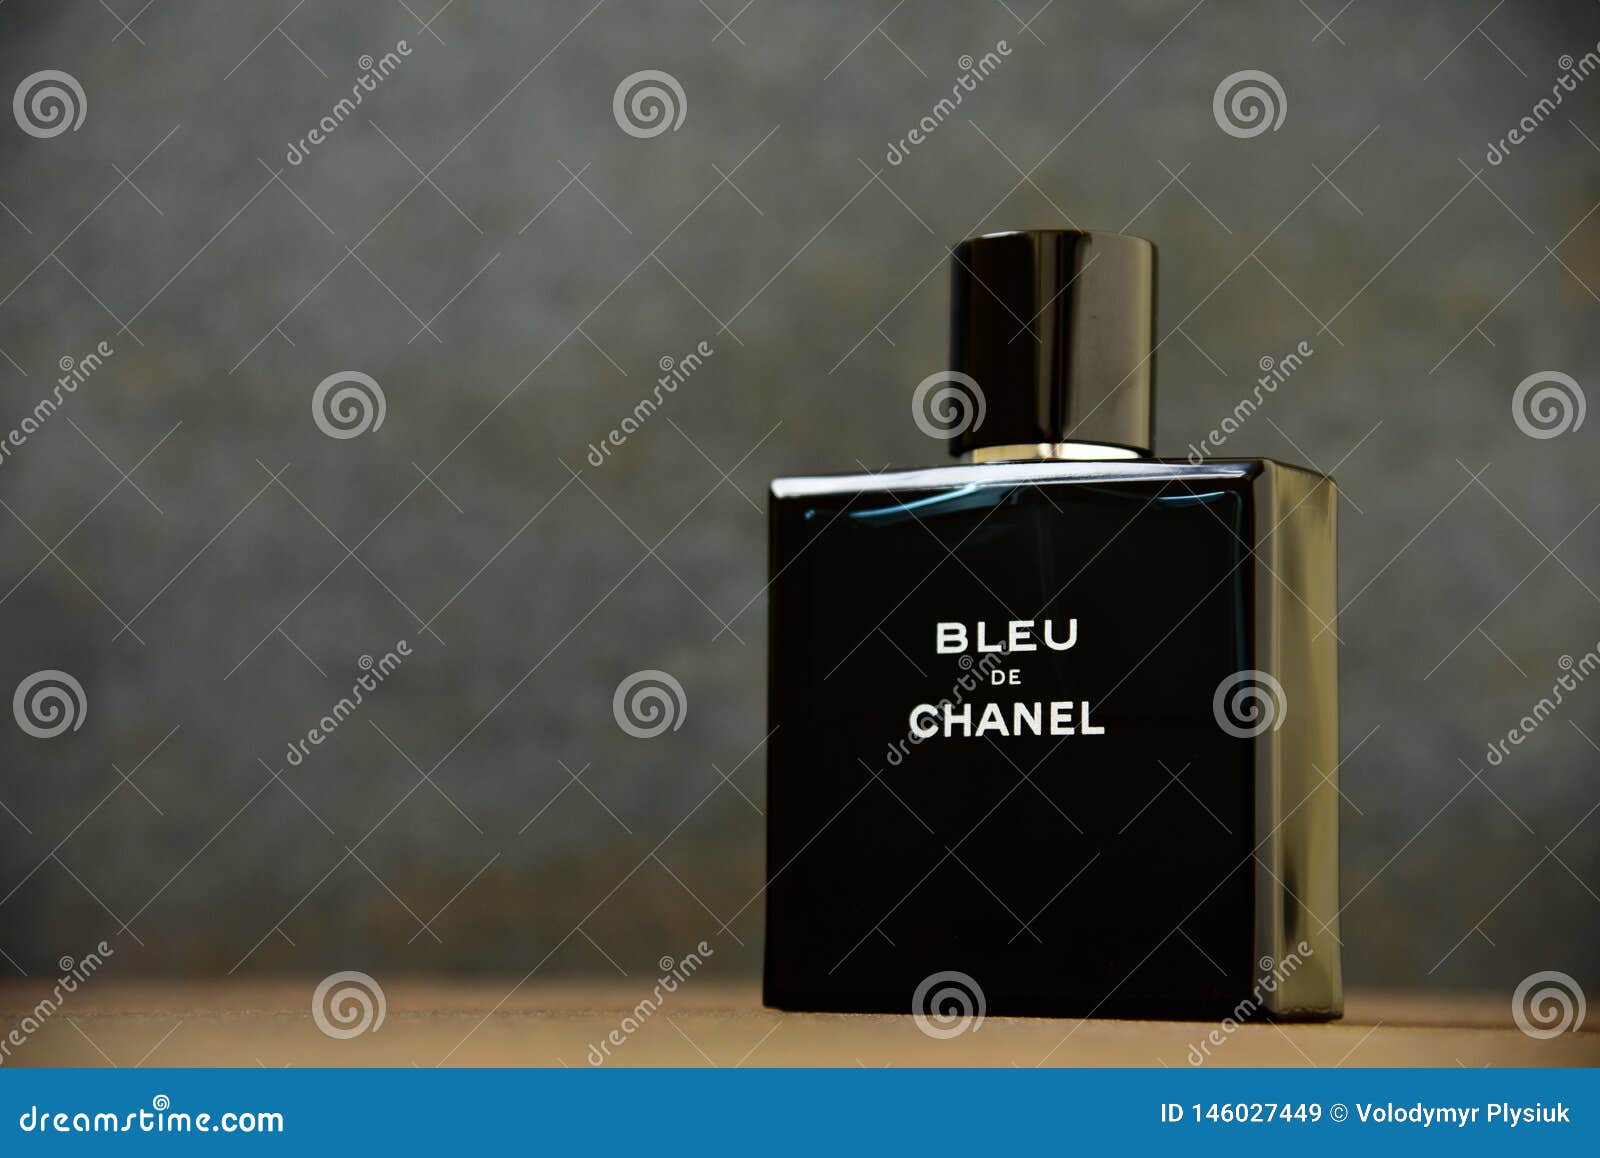 A Bottle Of Chanel Perfume On A Uniform Yellow Background, With A  Reflection Of The Lower Part. Allure Mens Perfume Series. 2020-07-05  Samara. Stock Photo, Picture and Royalty Free Image. Image 165011934.